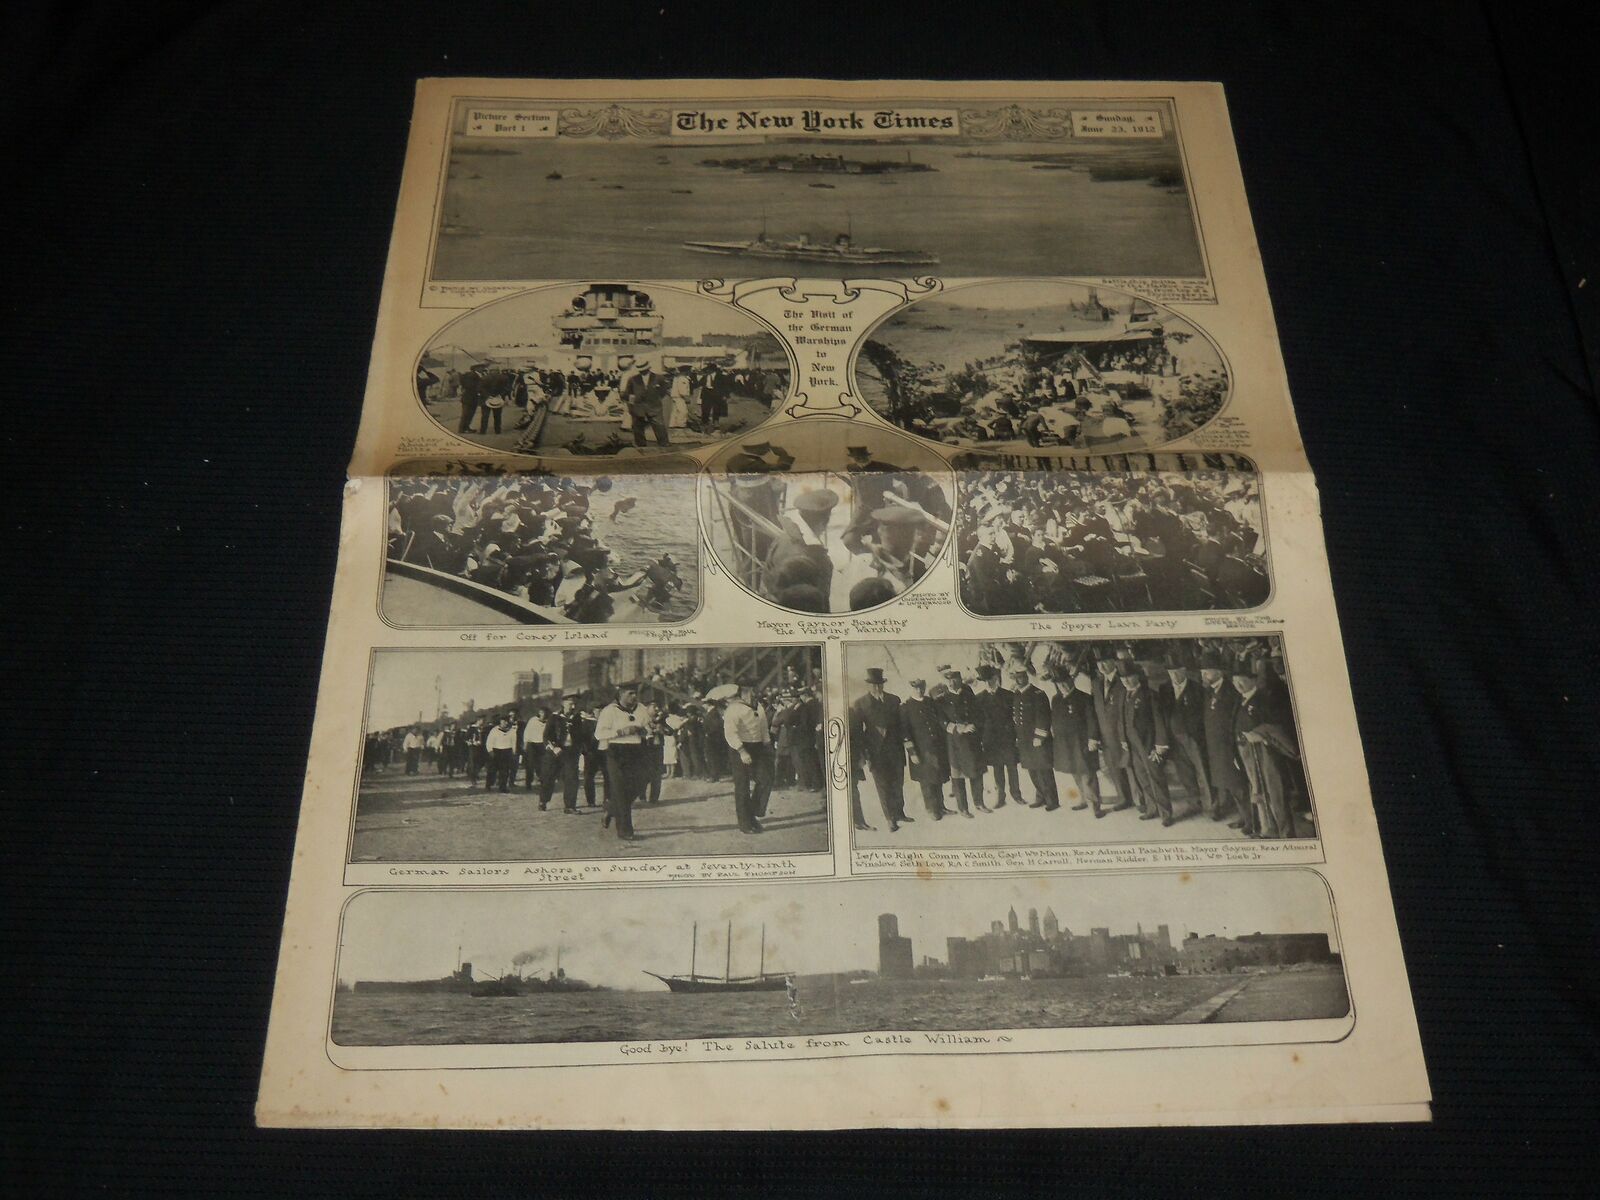 1912 JUNE 23 NEW YORK TIMES PICTURE SECTION - OLYMPIC ATHLETES THORPE - NP 5627